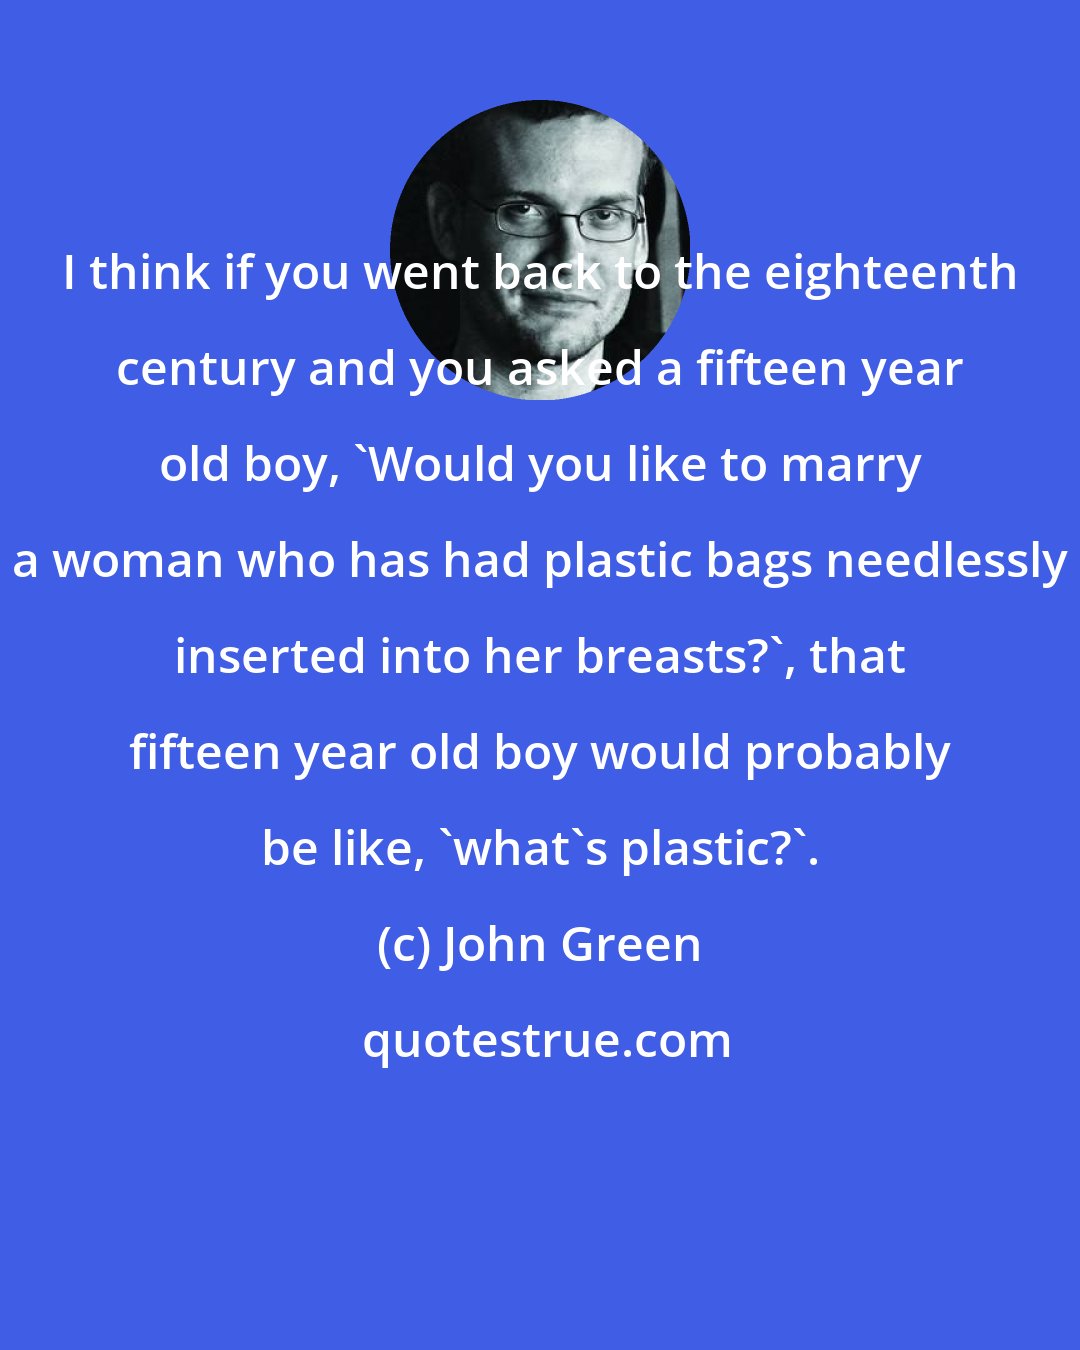 John Green: I think if you went back to the eighteenth century and you asked a fifteen year old boy, 'Would you like to marry a woman who has had plastic bags needlessly inserted into her breasts?', that fifteen year old boy would probably be like, 'what's plastic?'.